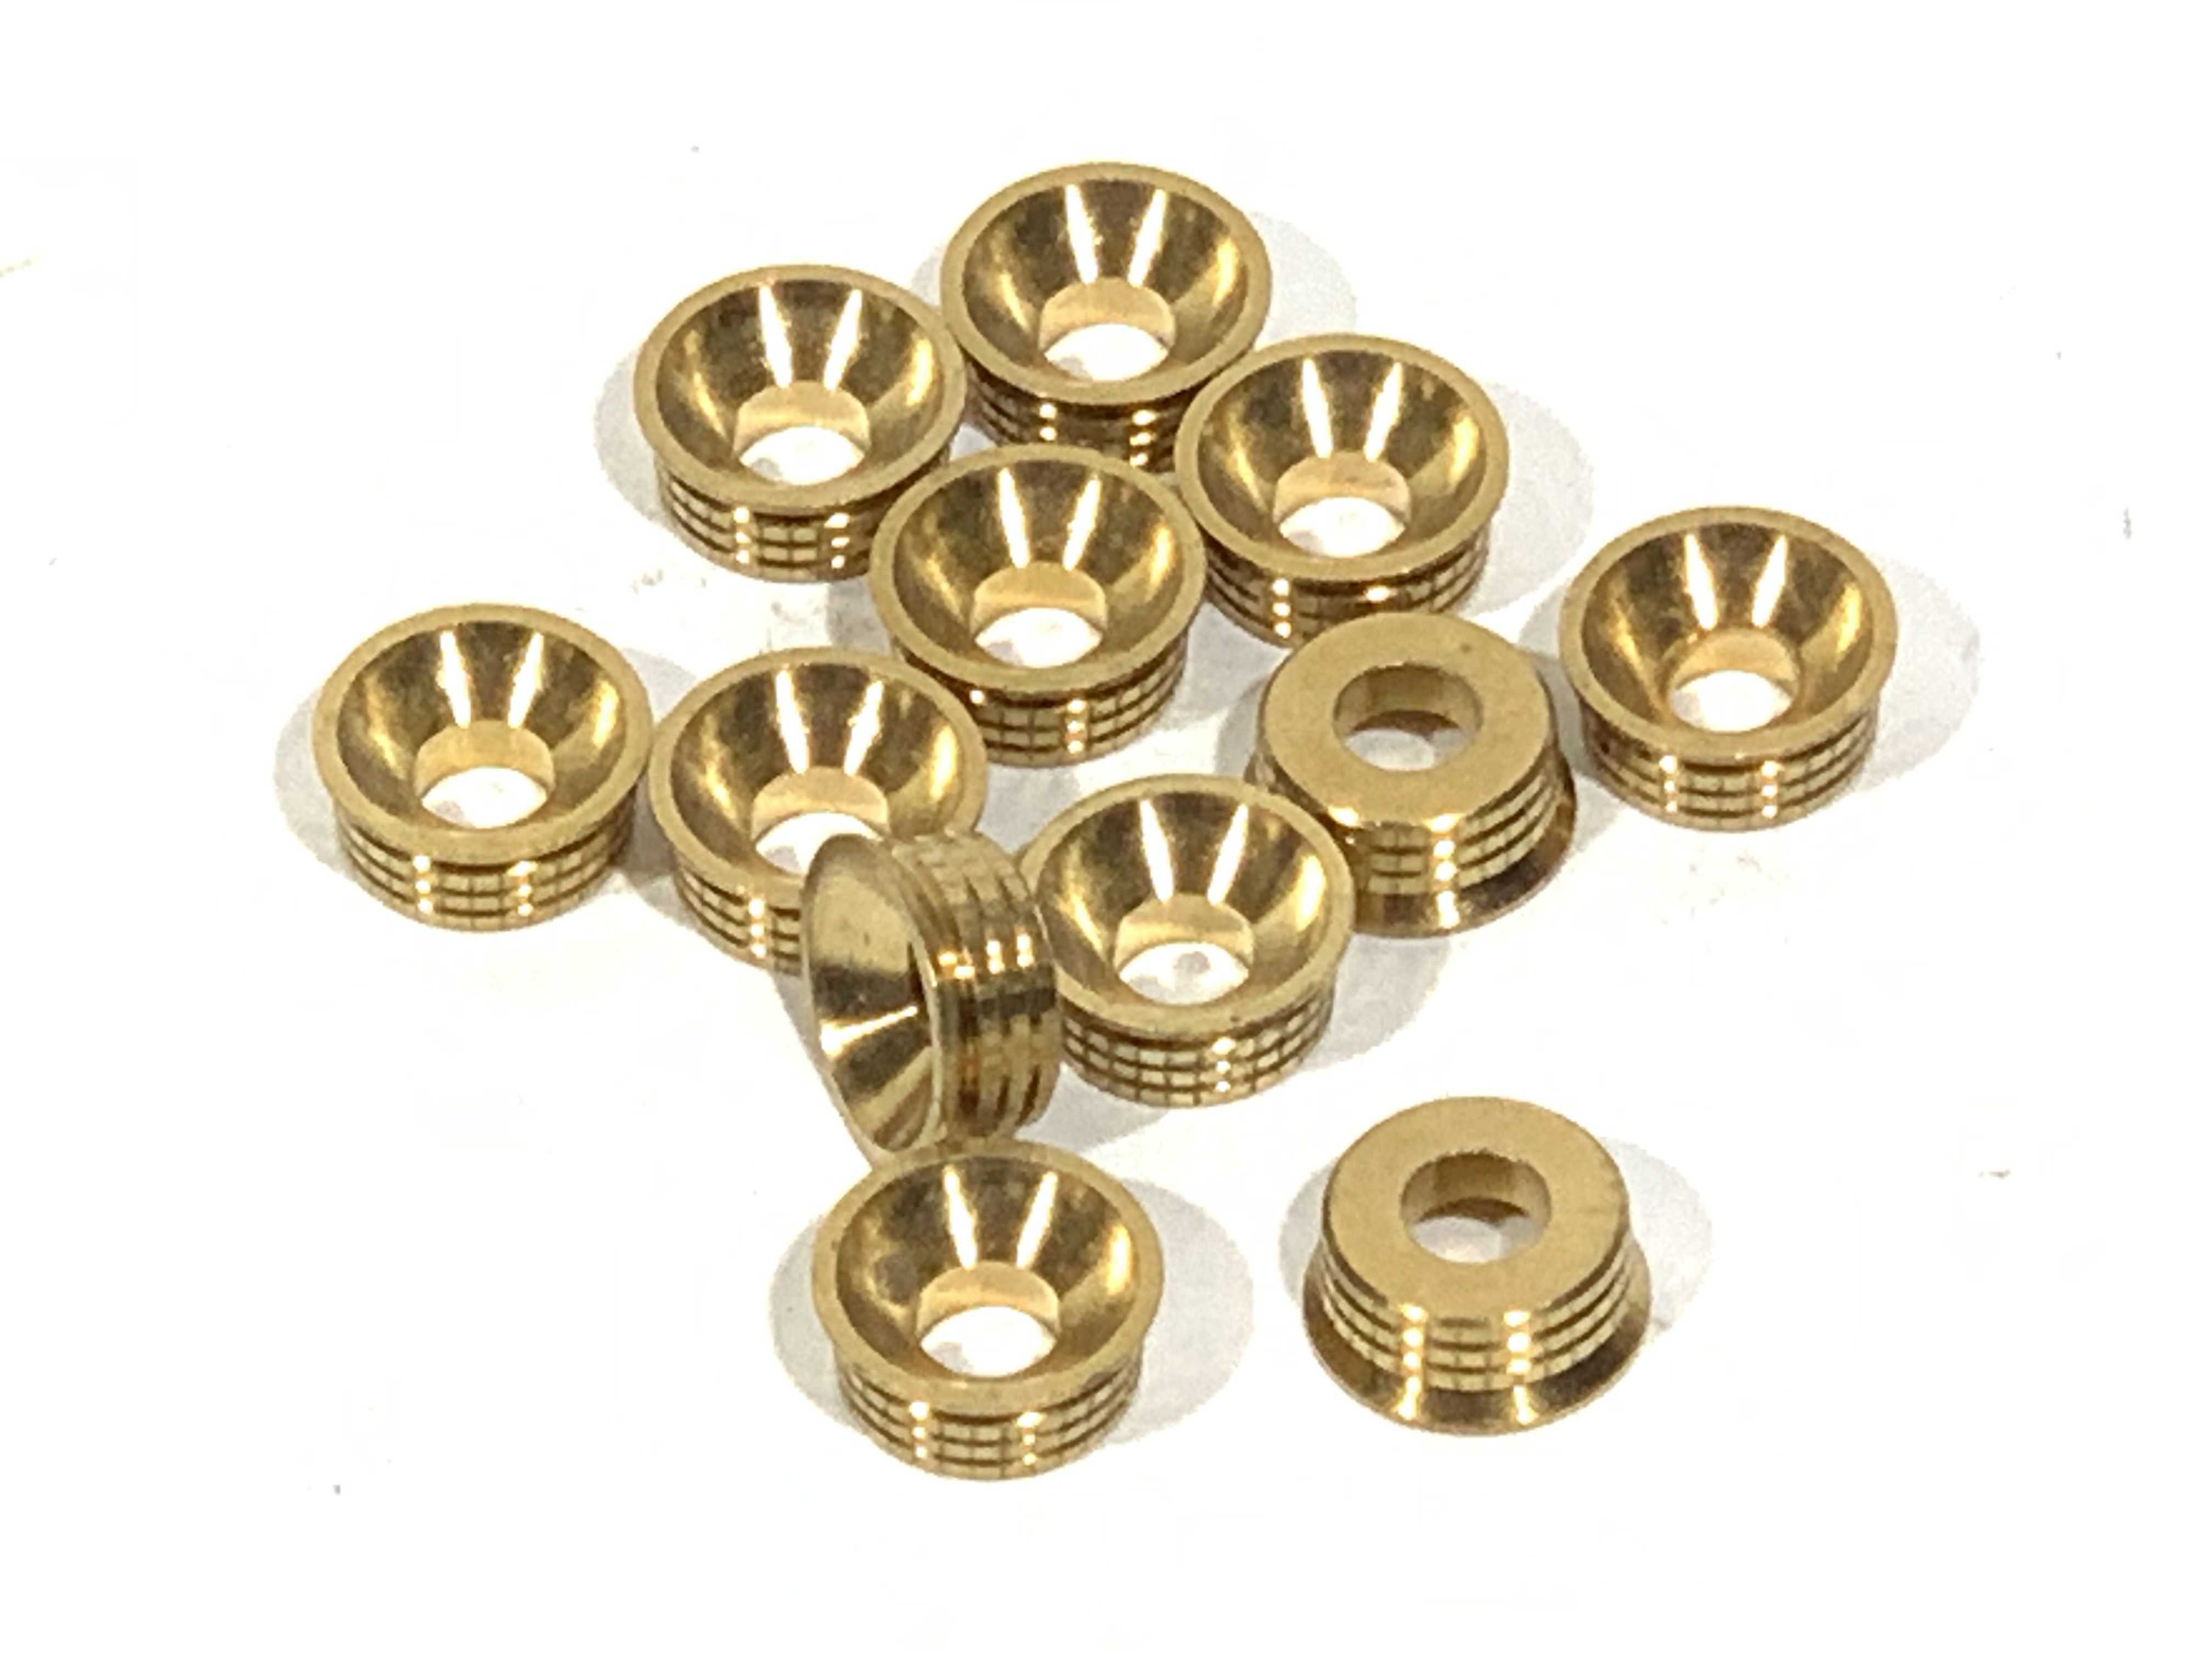 THICK M4,5,6,8,10,12,16 TO FIT BOLTS & SCREWS CHEAP SOLID BRASS FORM A WASHERS 